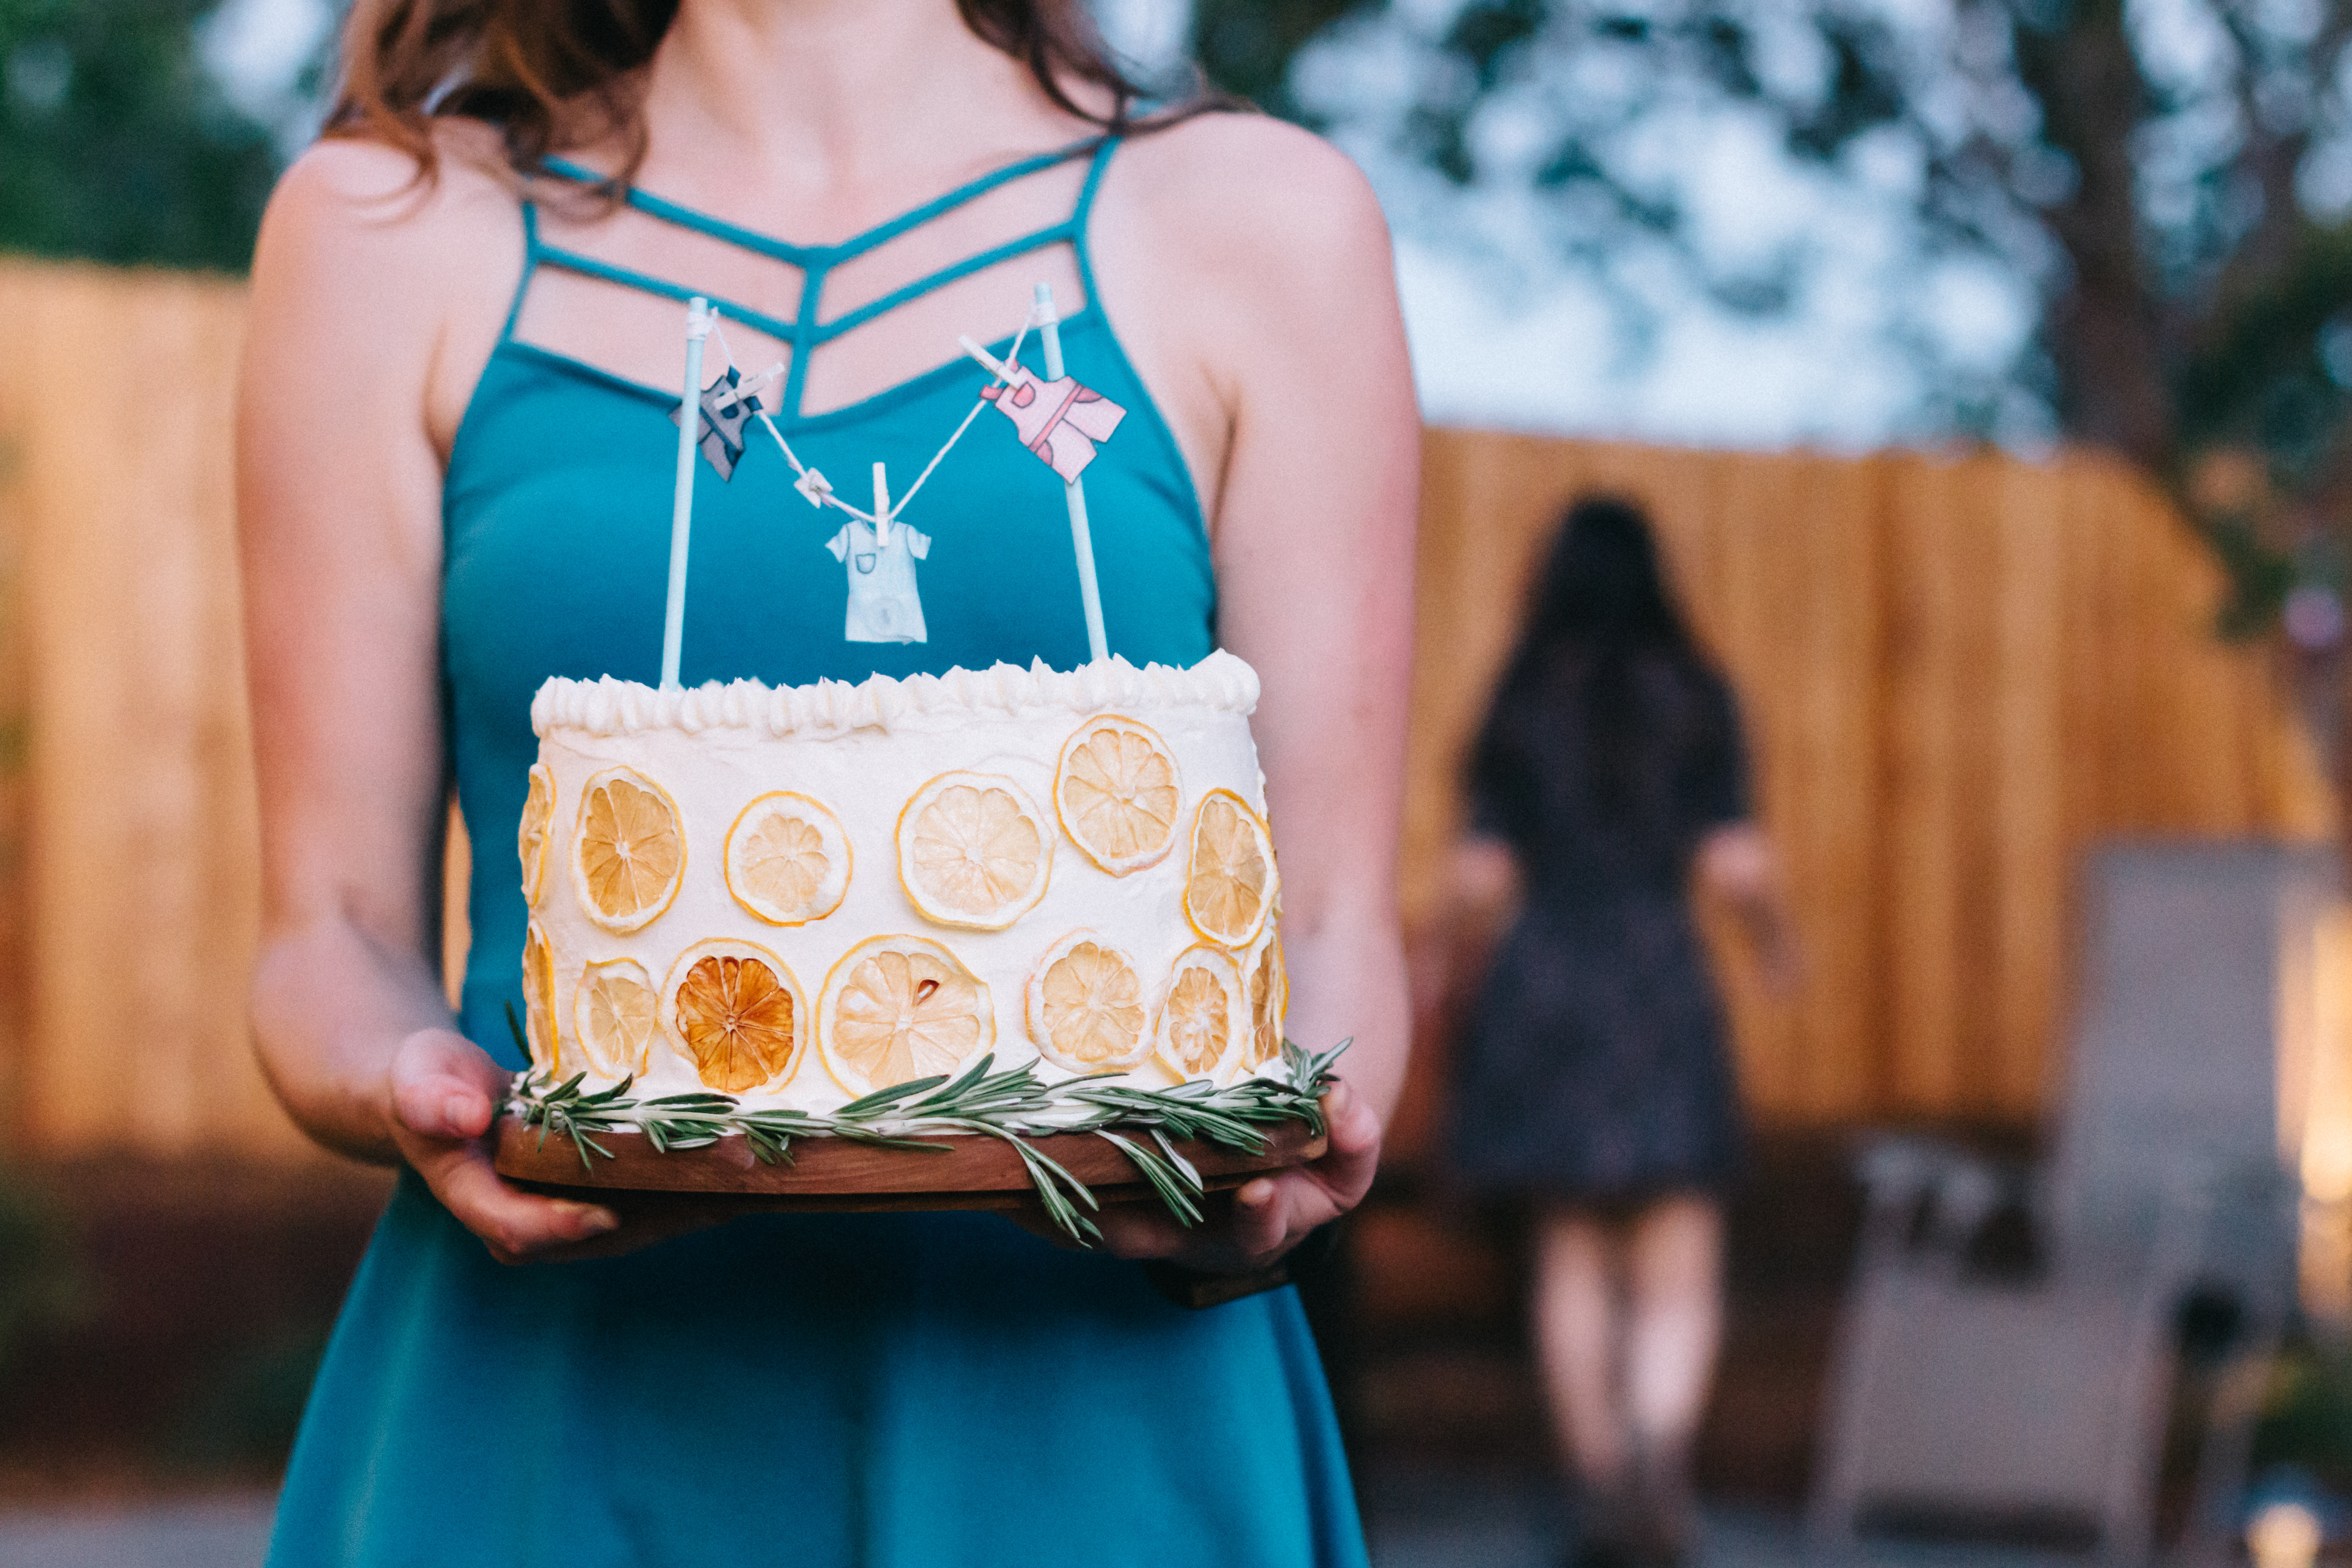 This light and classic Rosemary Sponge Cake is layered with rosemary infused apricot compote and white chocolate buttercream frosting. Dehydrated lemons and rosemary make decoration easy and beautiful. | www.megiswell.com